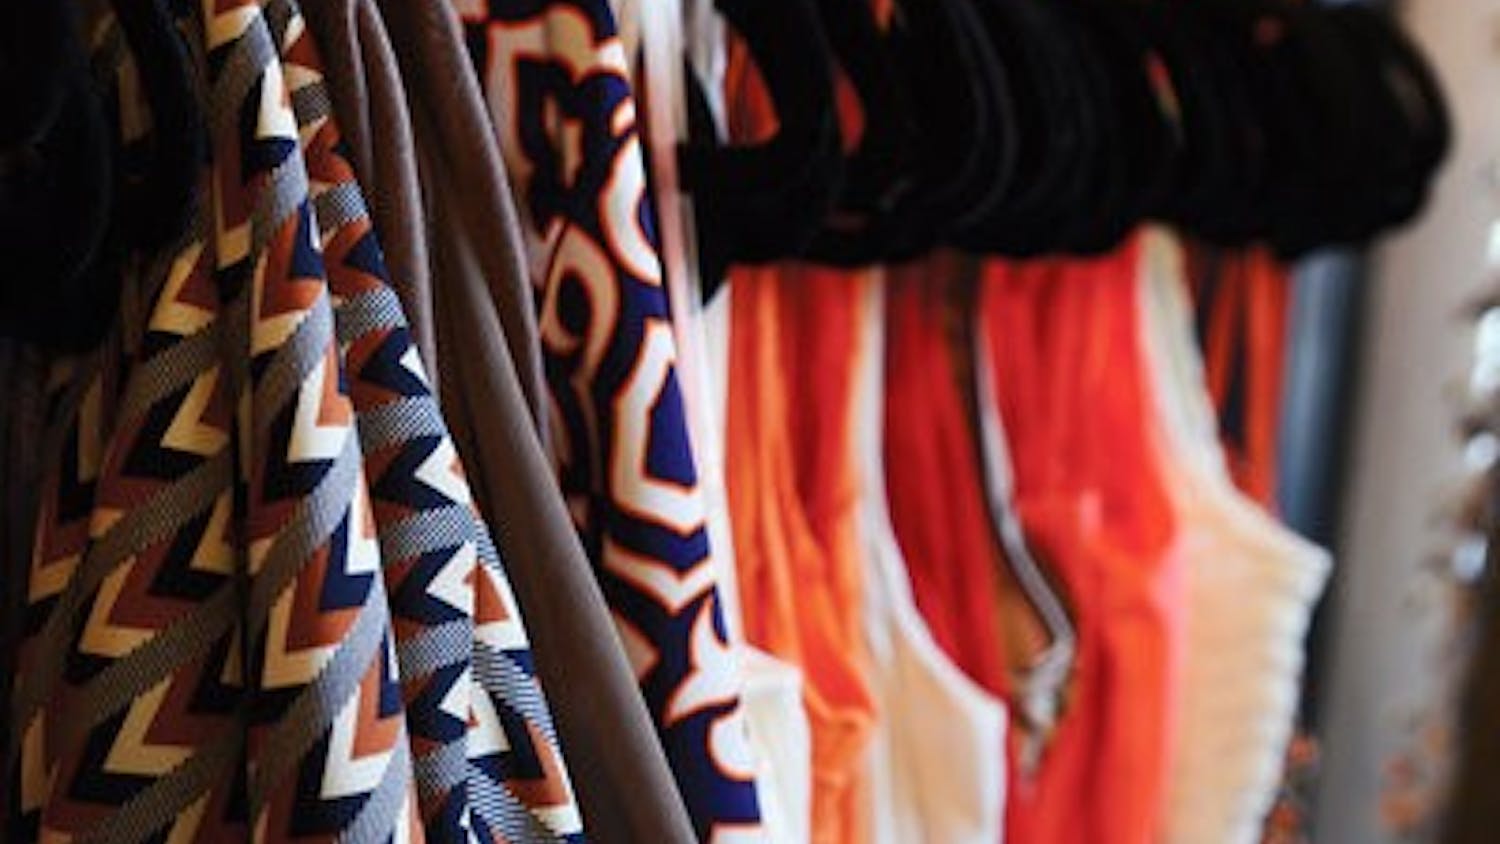 Gameday dresses hanging in Therapy Boutique.